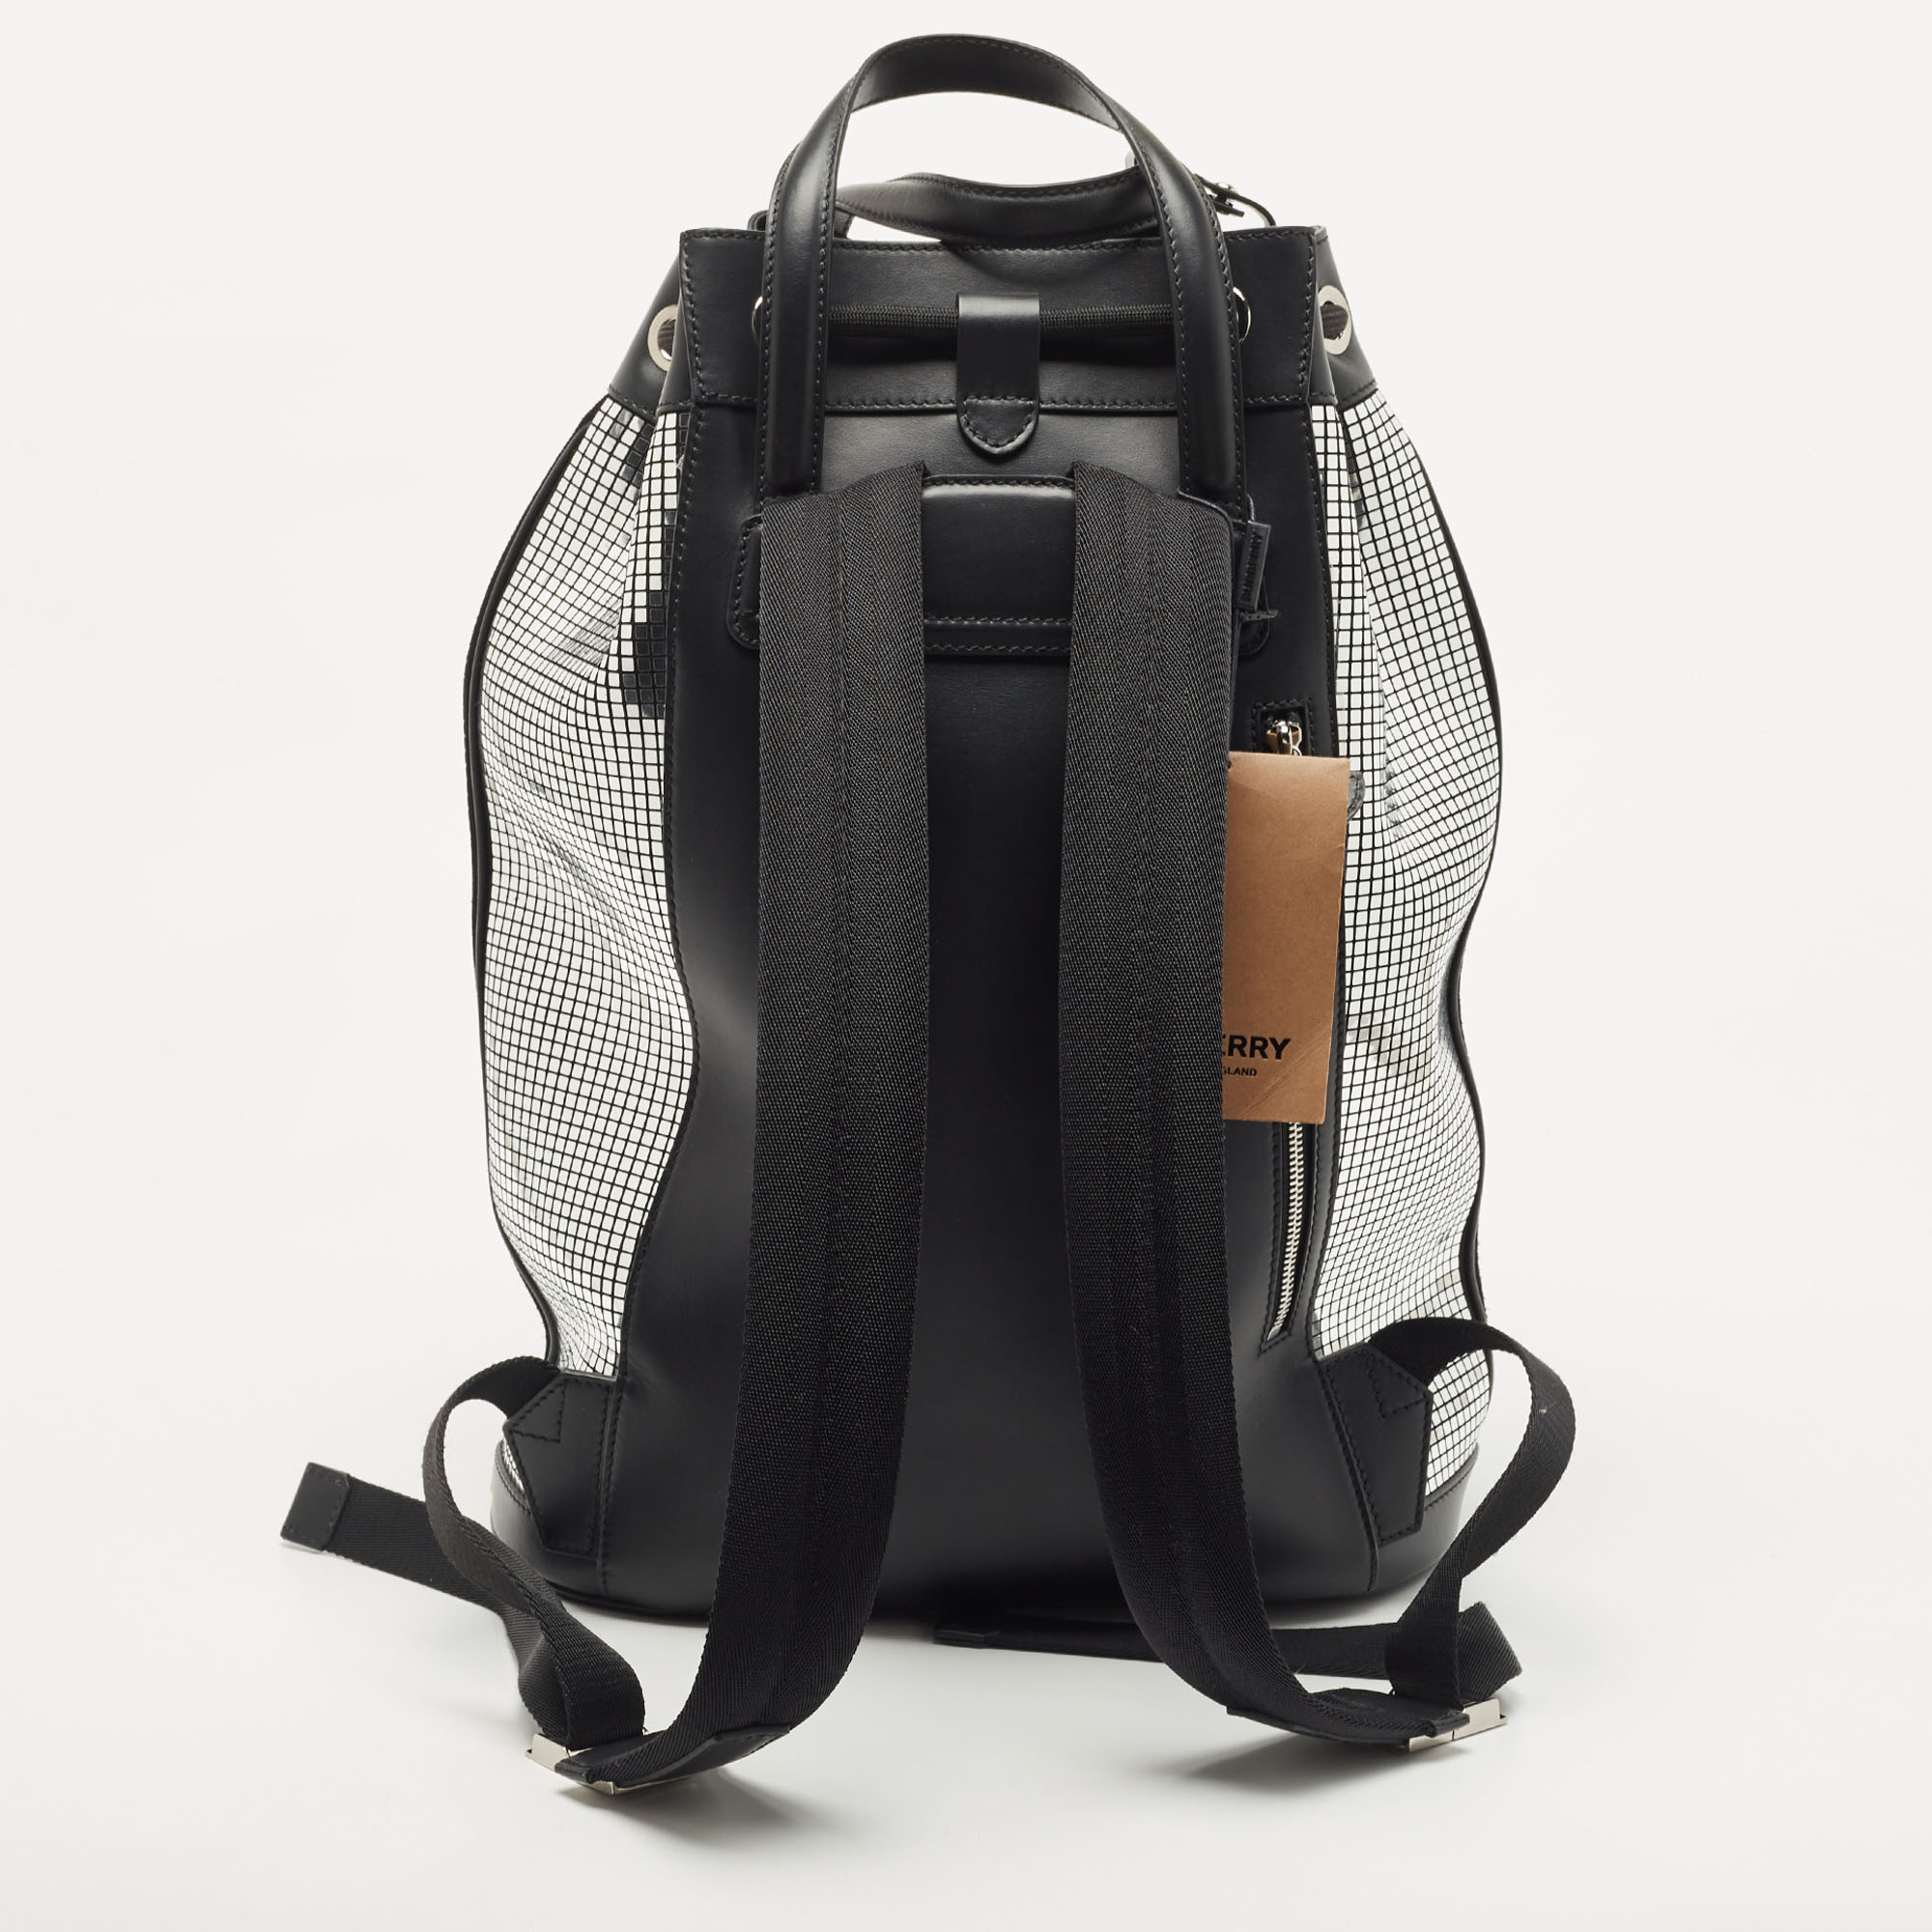 Burberry Black/Silver Mirror Effect And Suede Drawstring Backpack